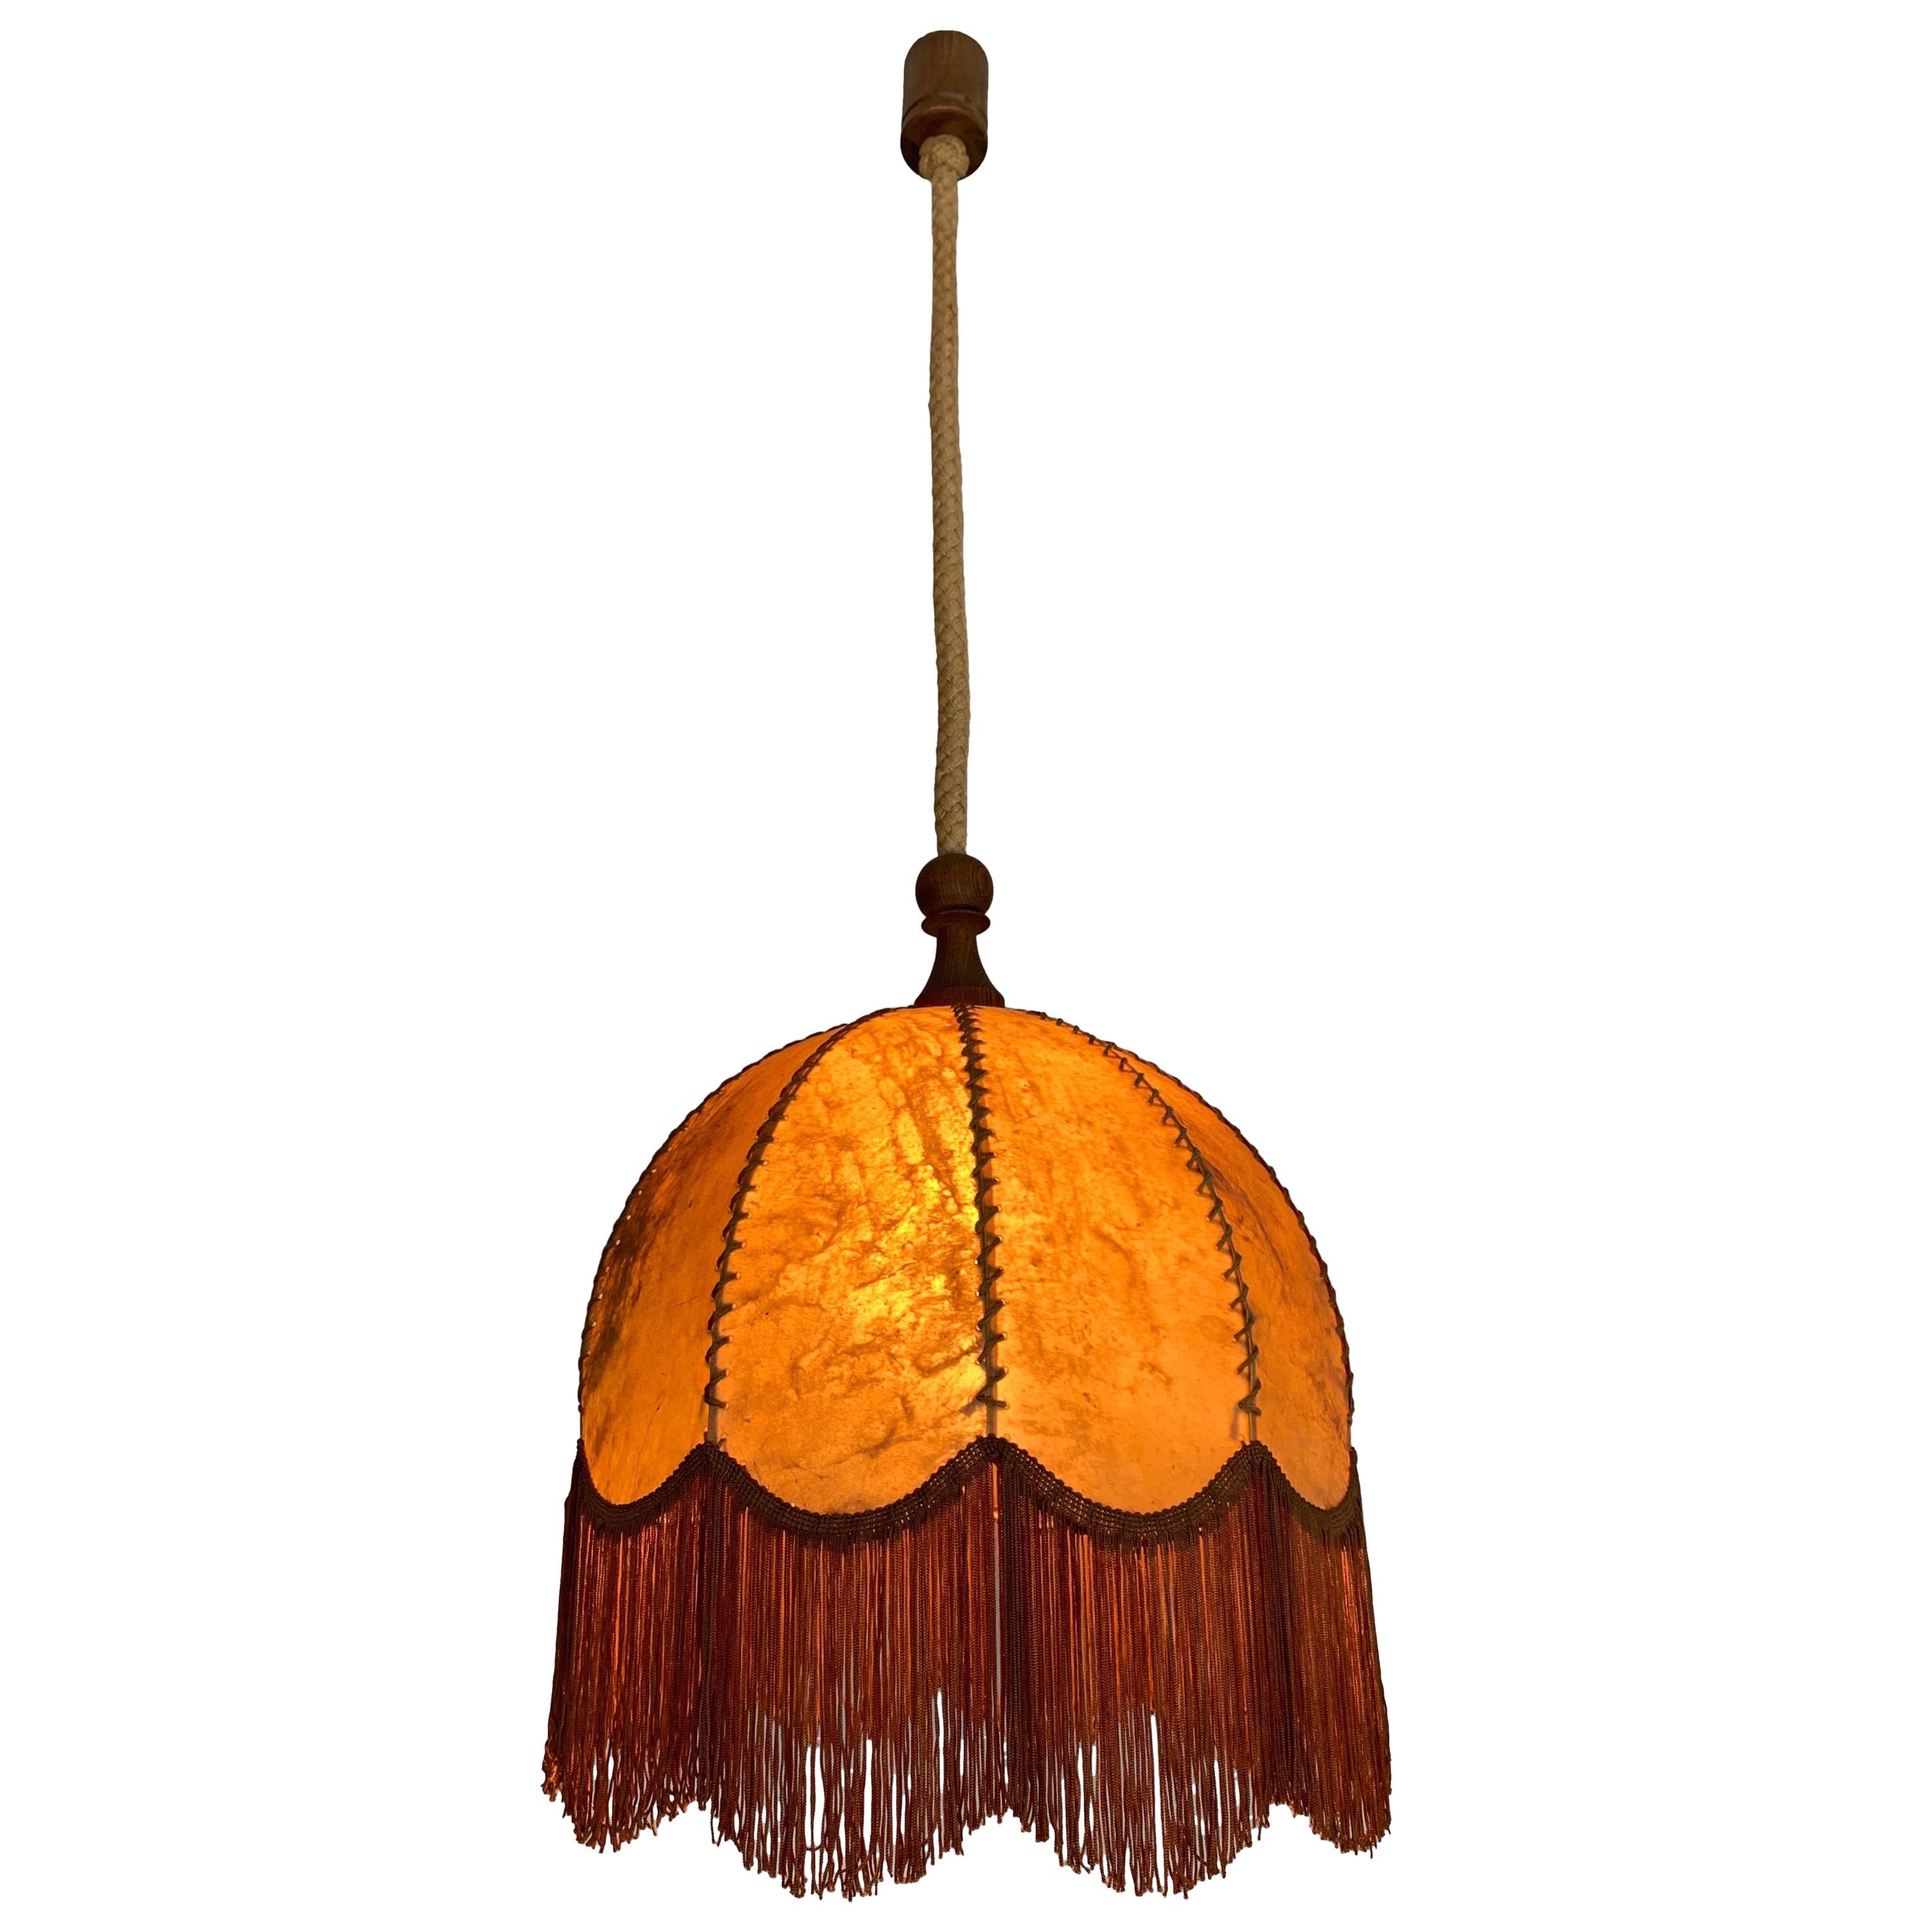 Good Looking Home Design Leather, Fringes, Wood and Rope Pendant Light, 1930s